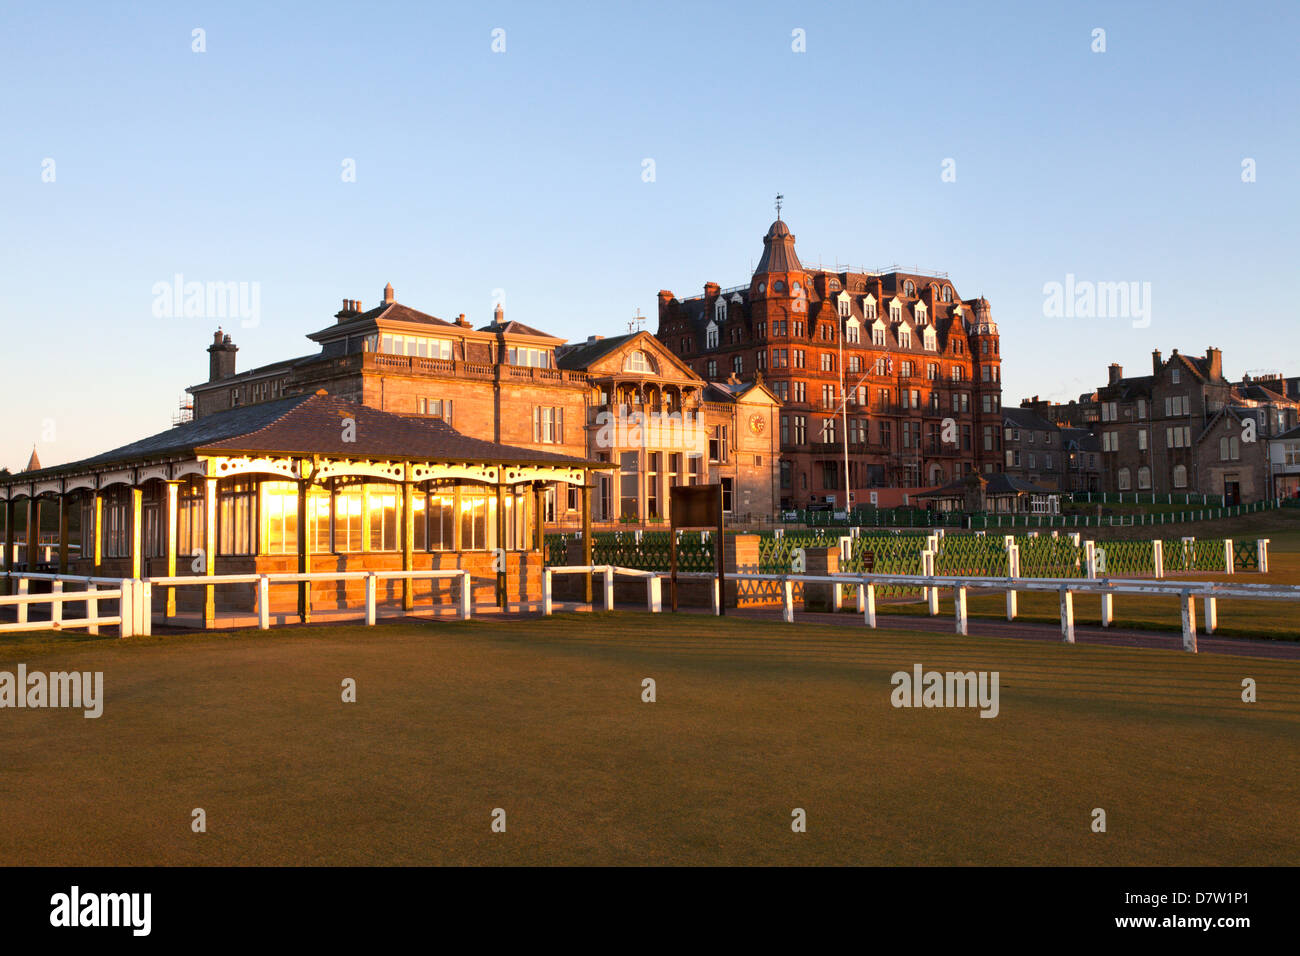 Caddie Pavilion and The Royal and Ancient Golf Club at the Old Course, St. Andrews, Fife, Scotland, United Kingdom Stock Photo